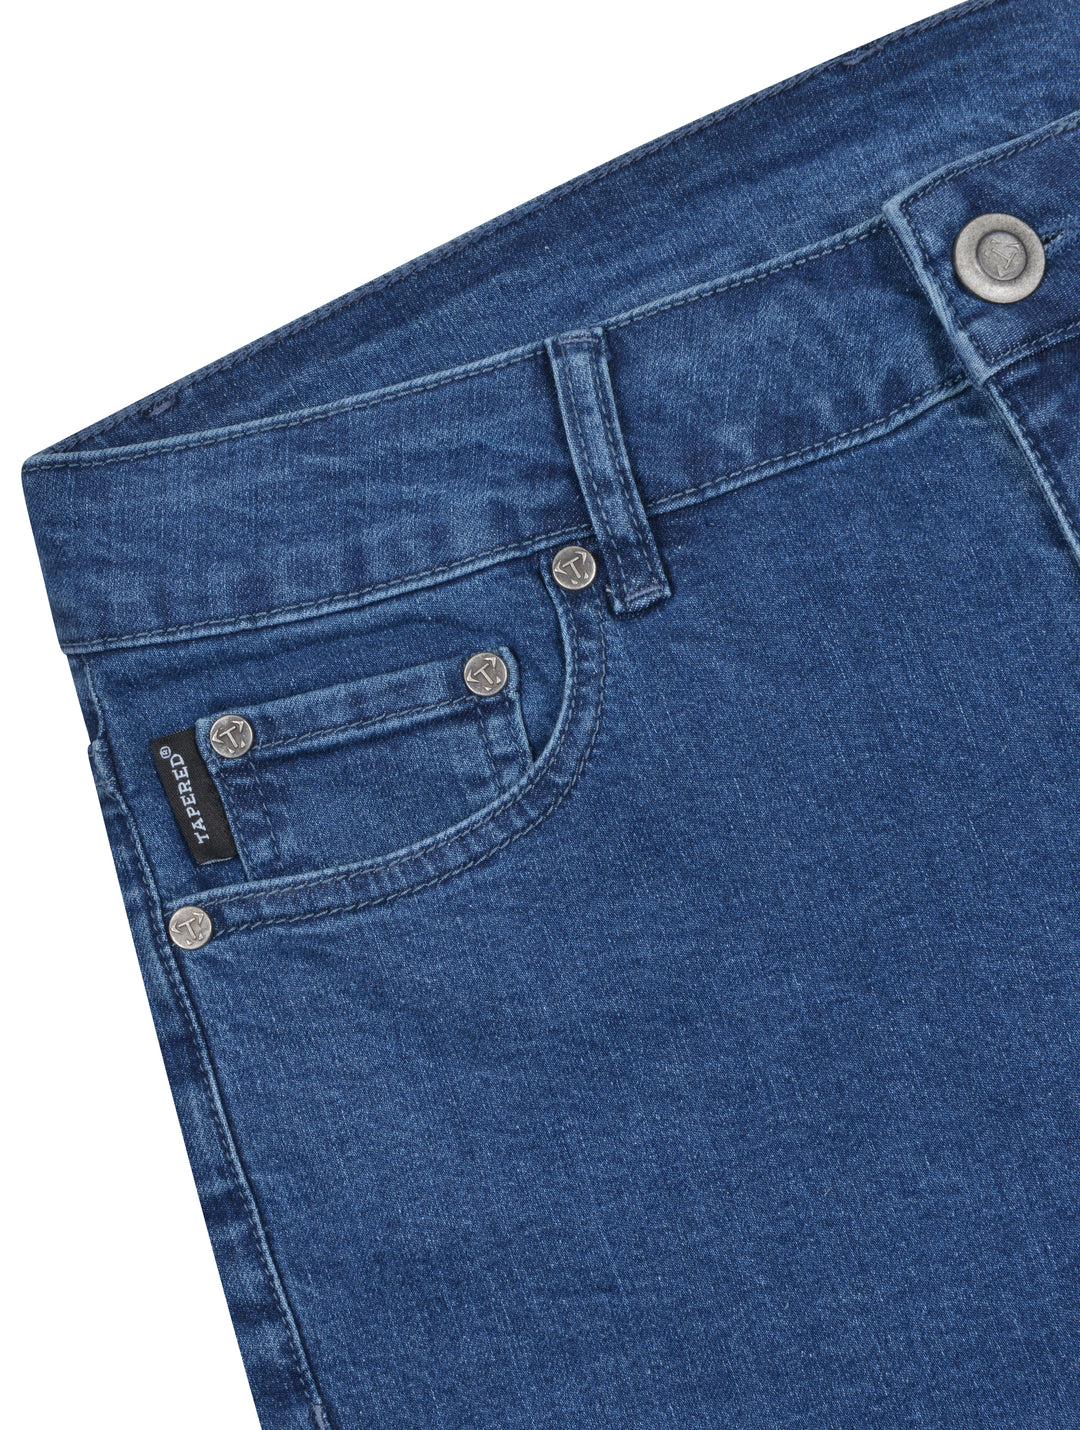 Mens Mid Wash Blue Tapered Jeans Buttons. The best tapered jeans for muscular guys.